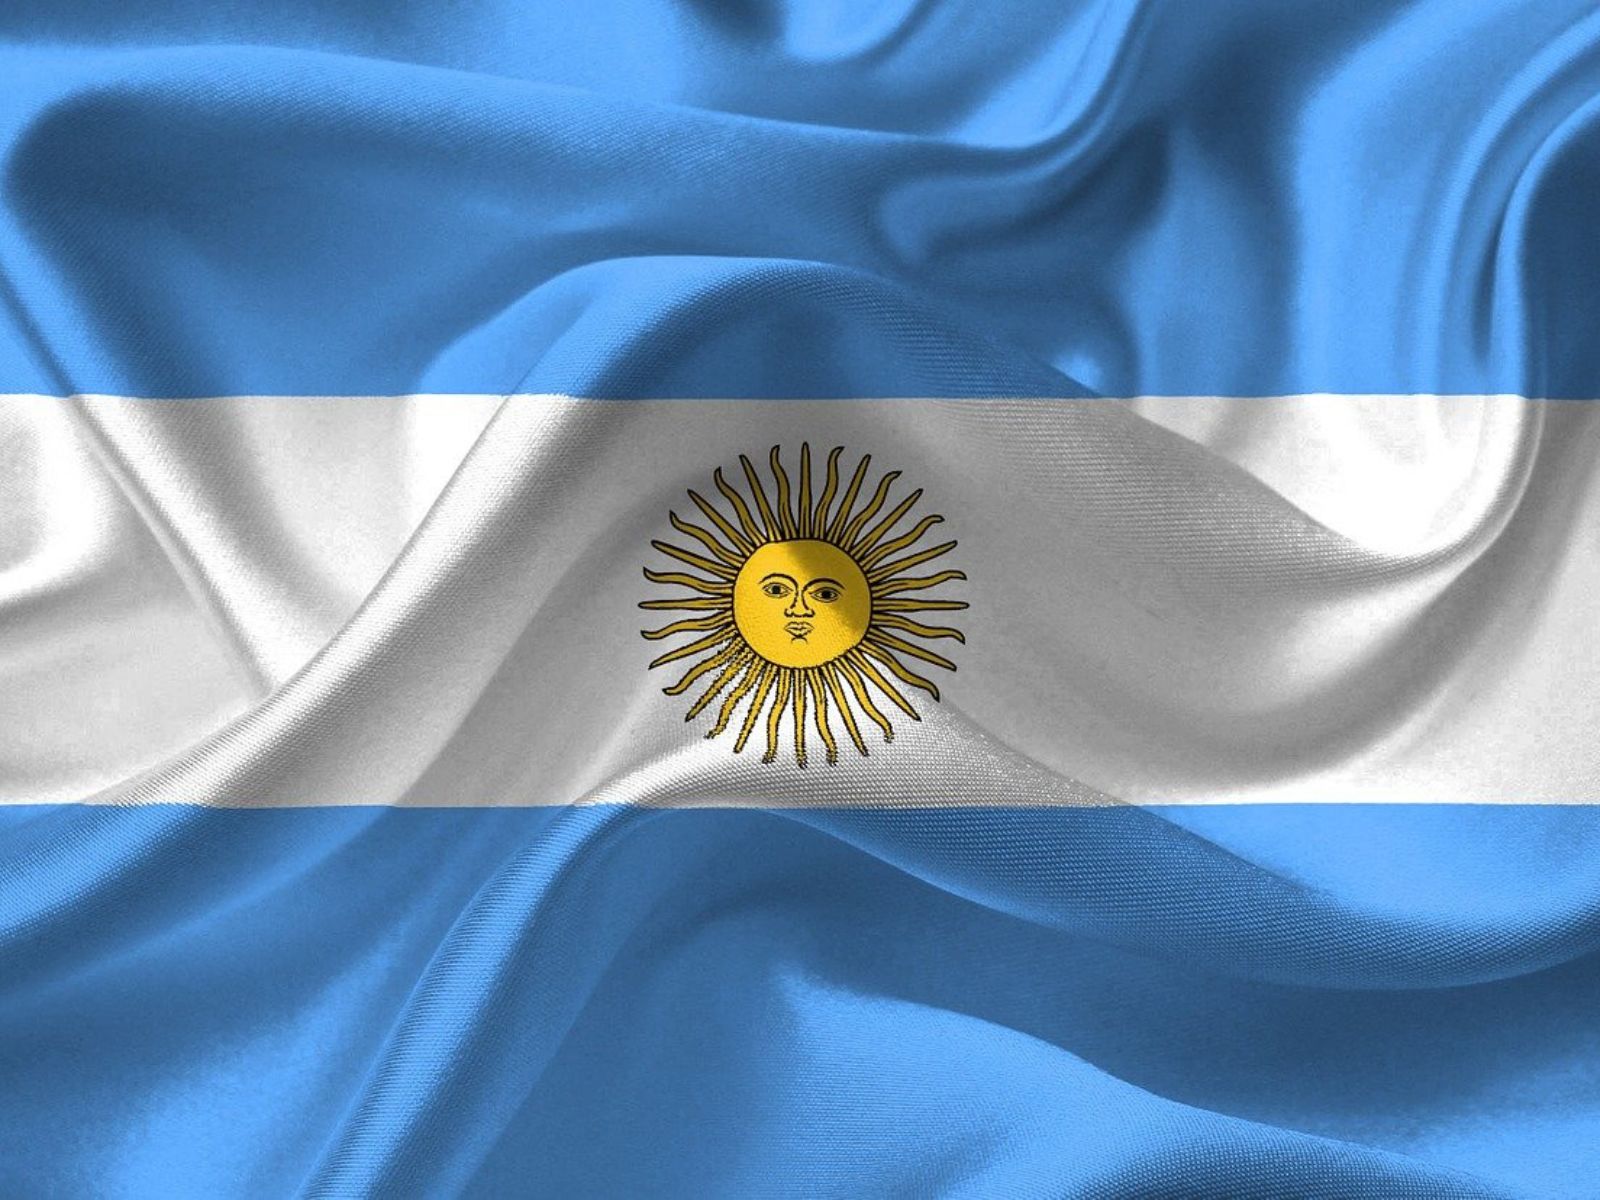 Argentina Medical Cannabis Market Projected To Reach $37 Million By 2026